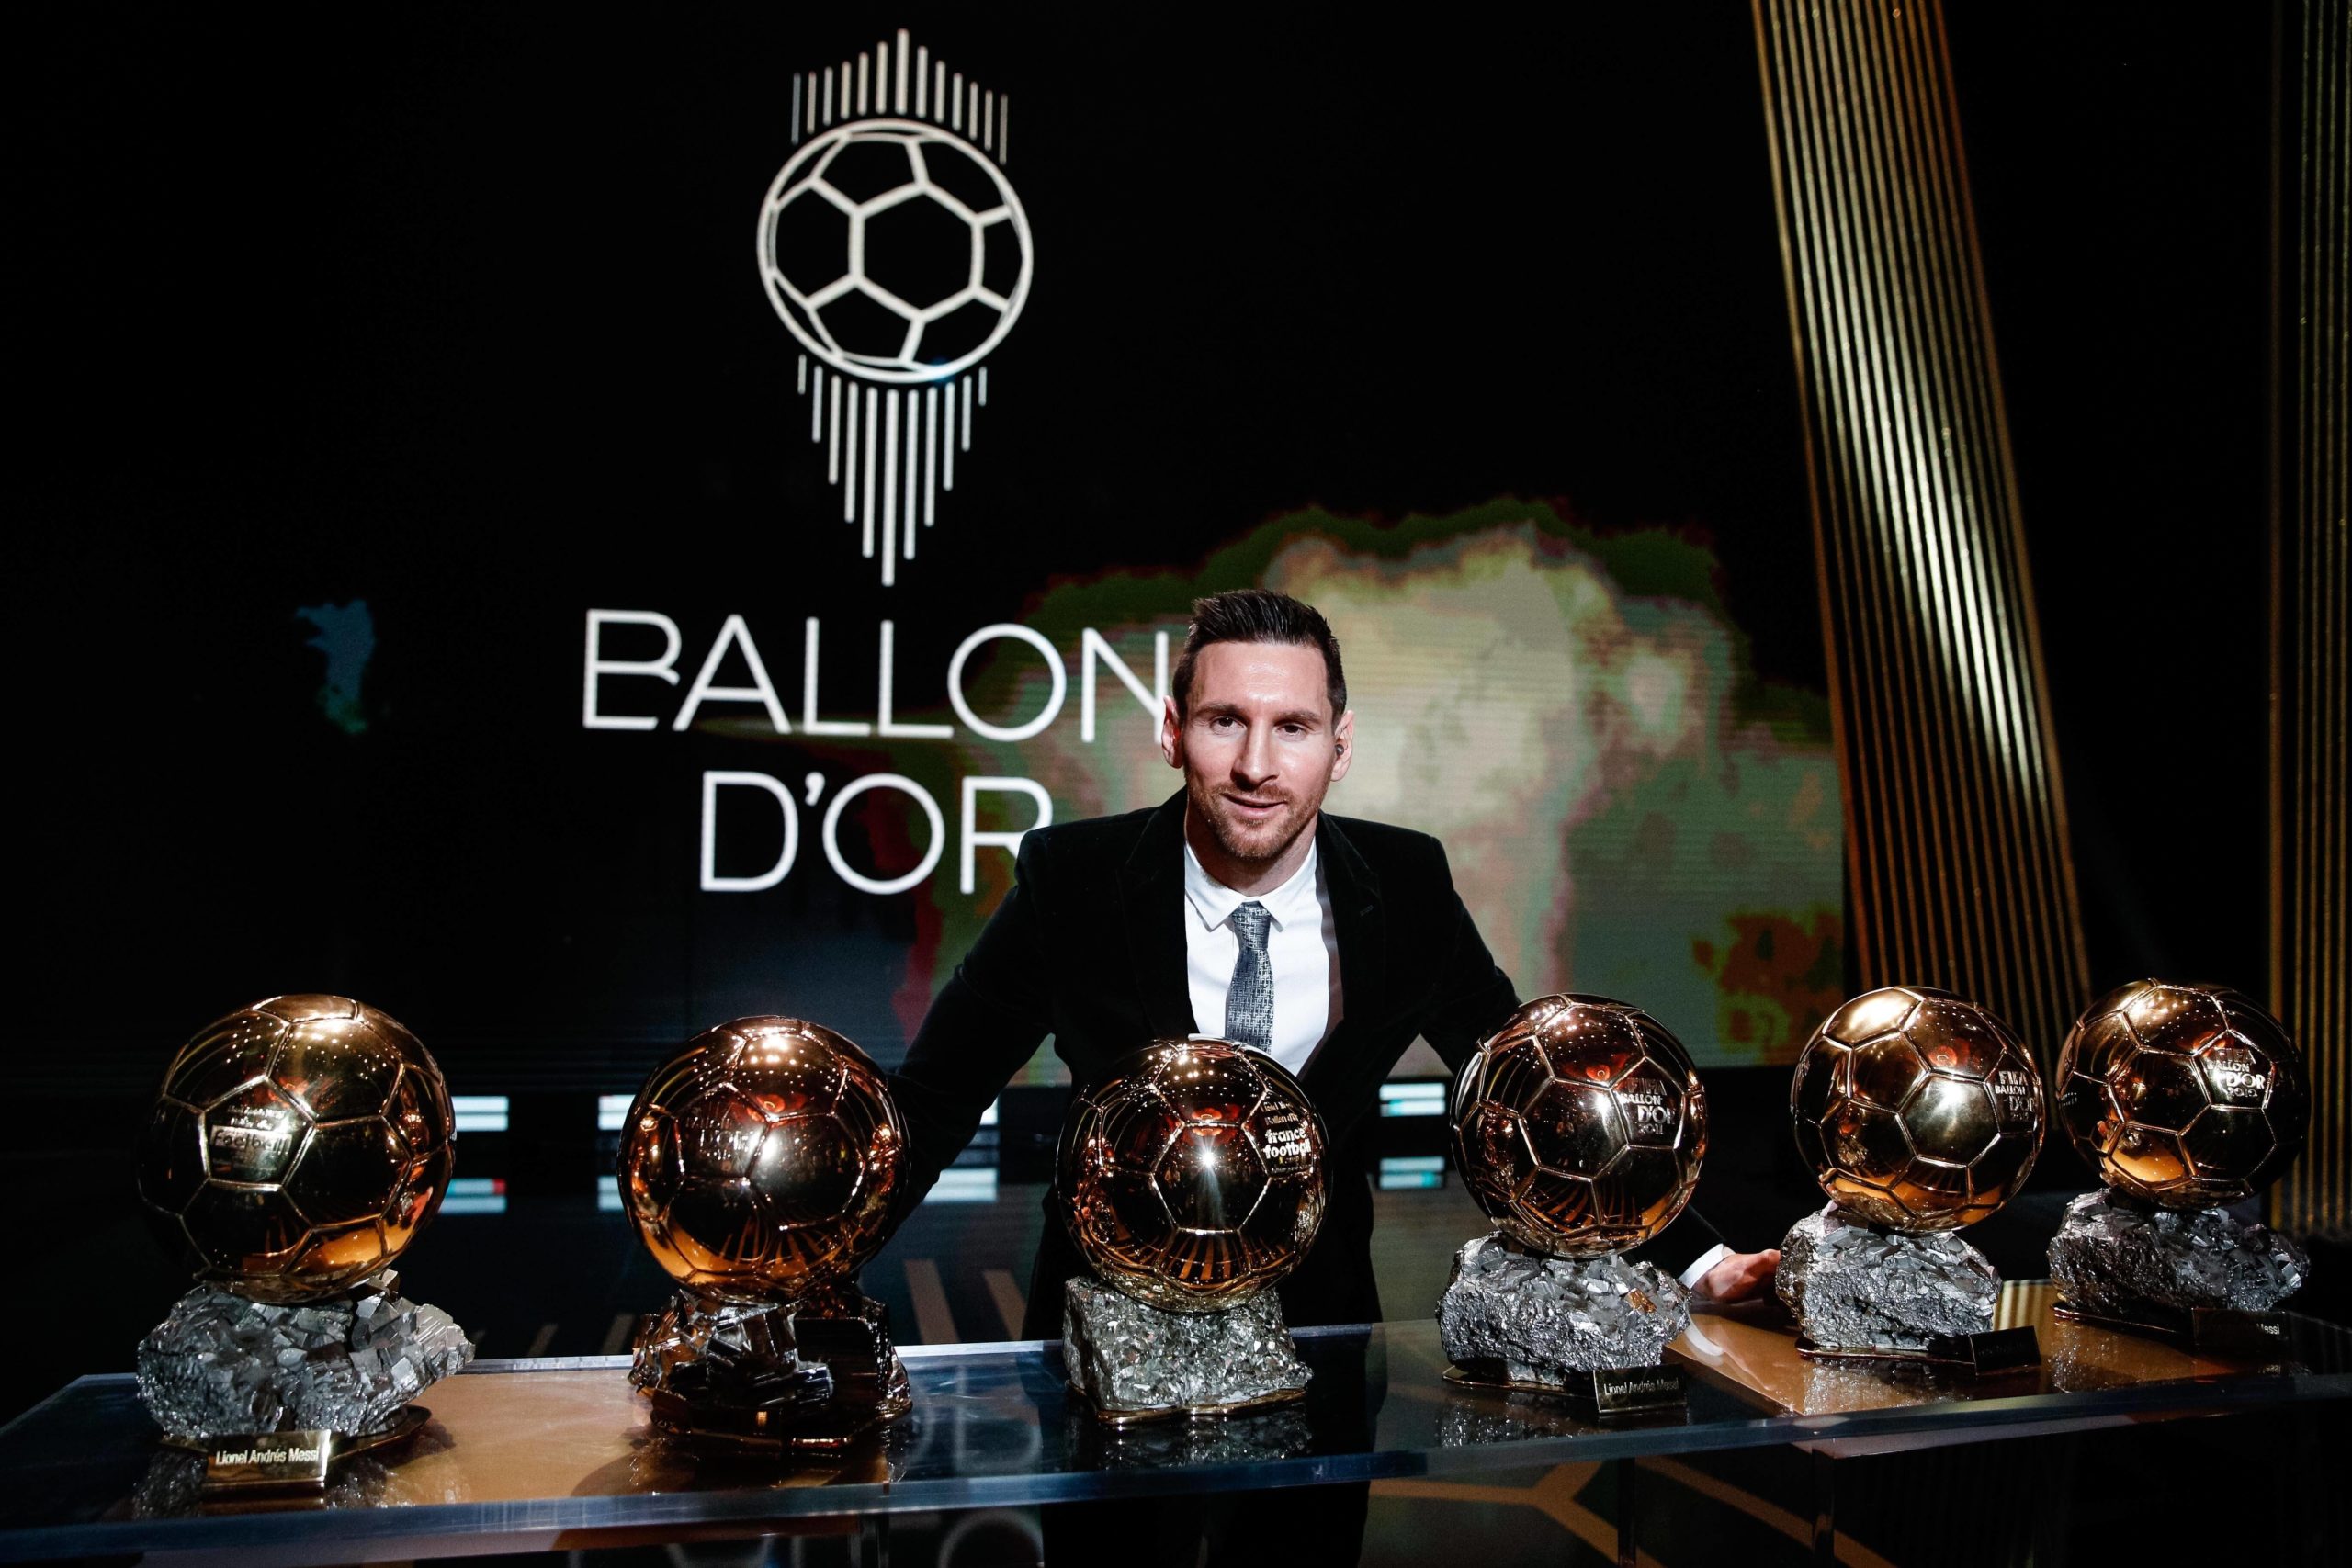 Ballon'd'or awards of Lionel Messi